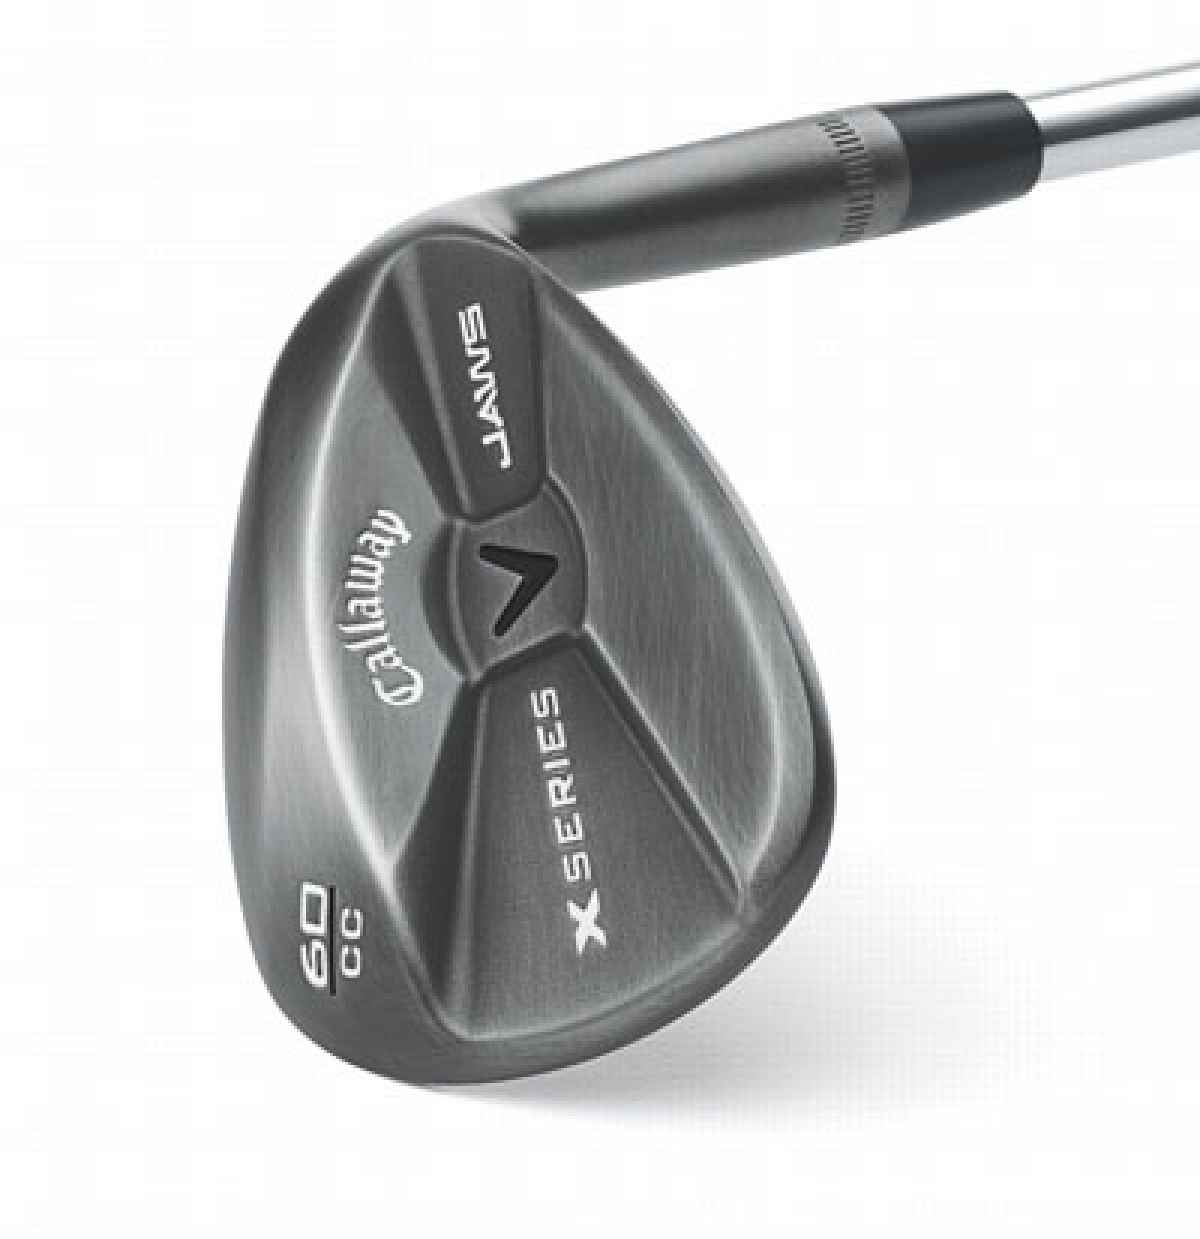 Tour-style X-Jaws wedges now available